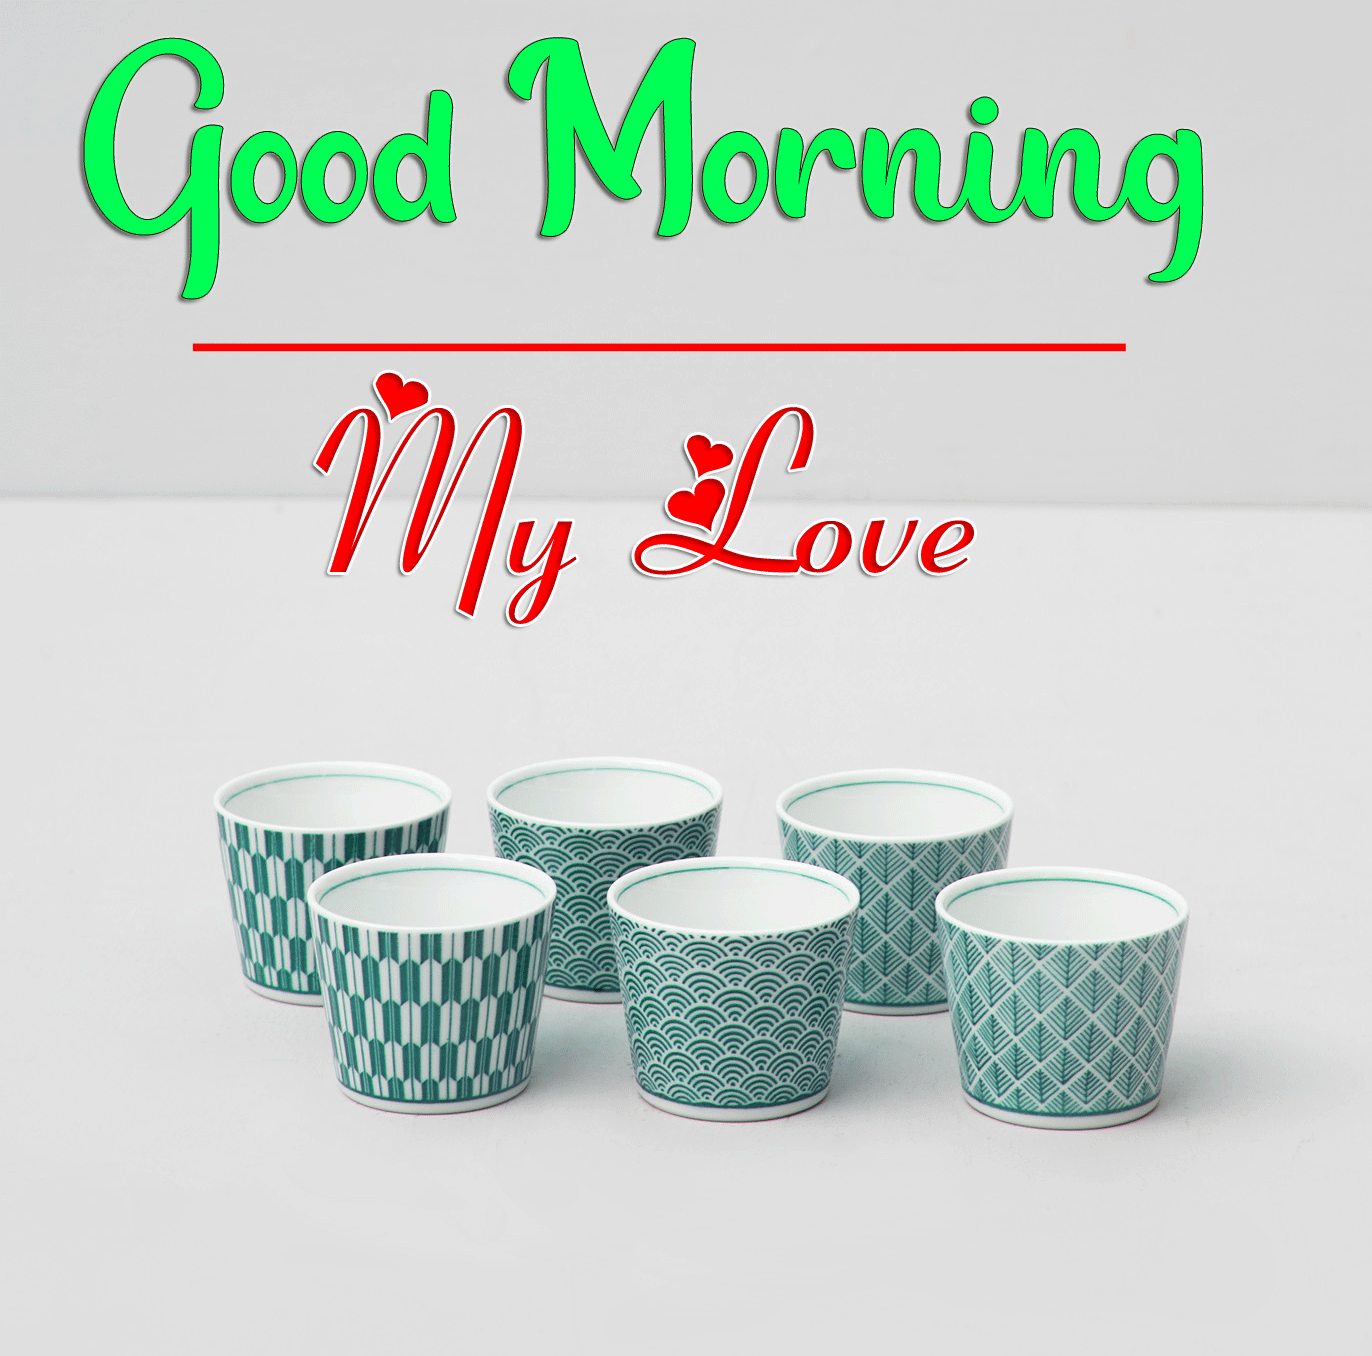 Good Morning Wishes Images HD 1080p 14